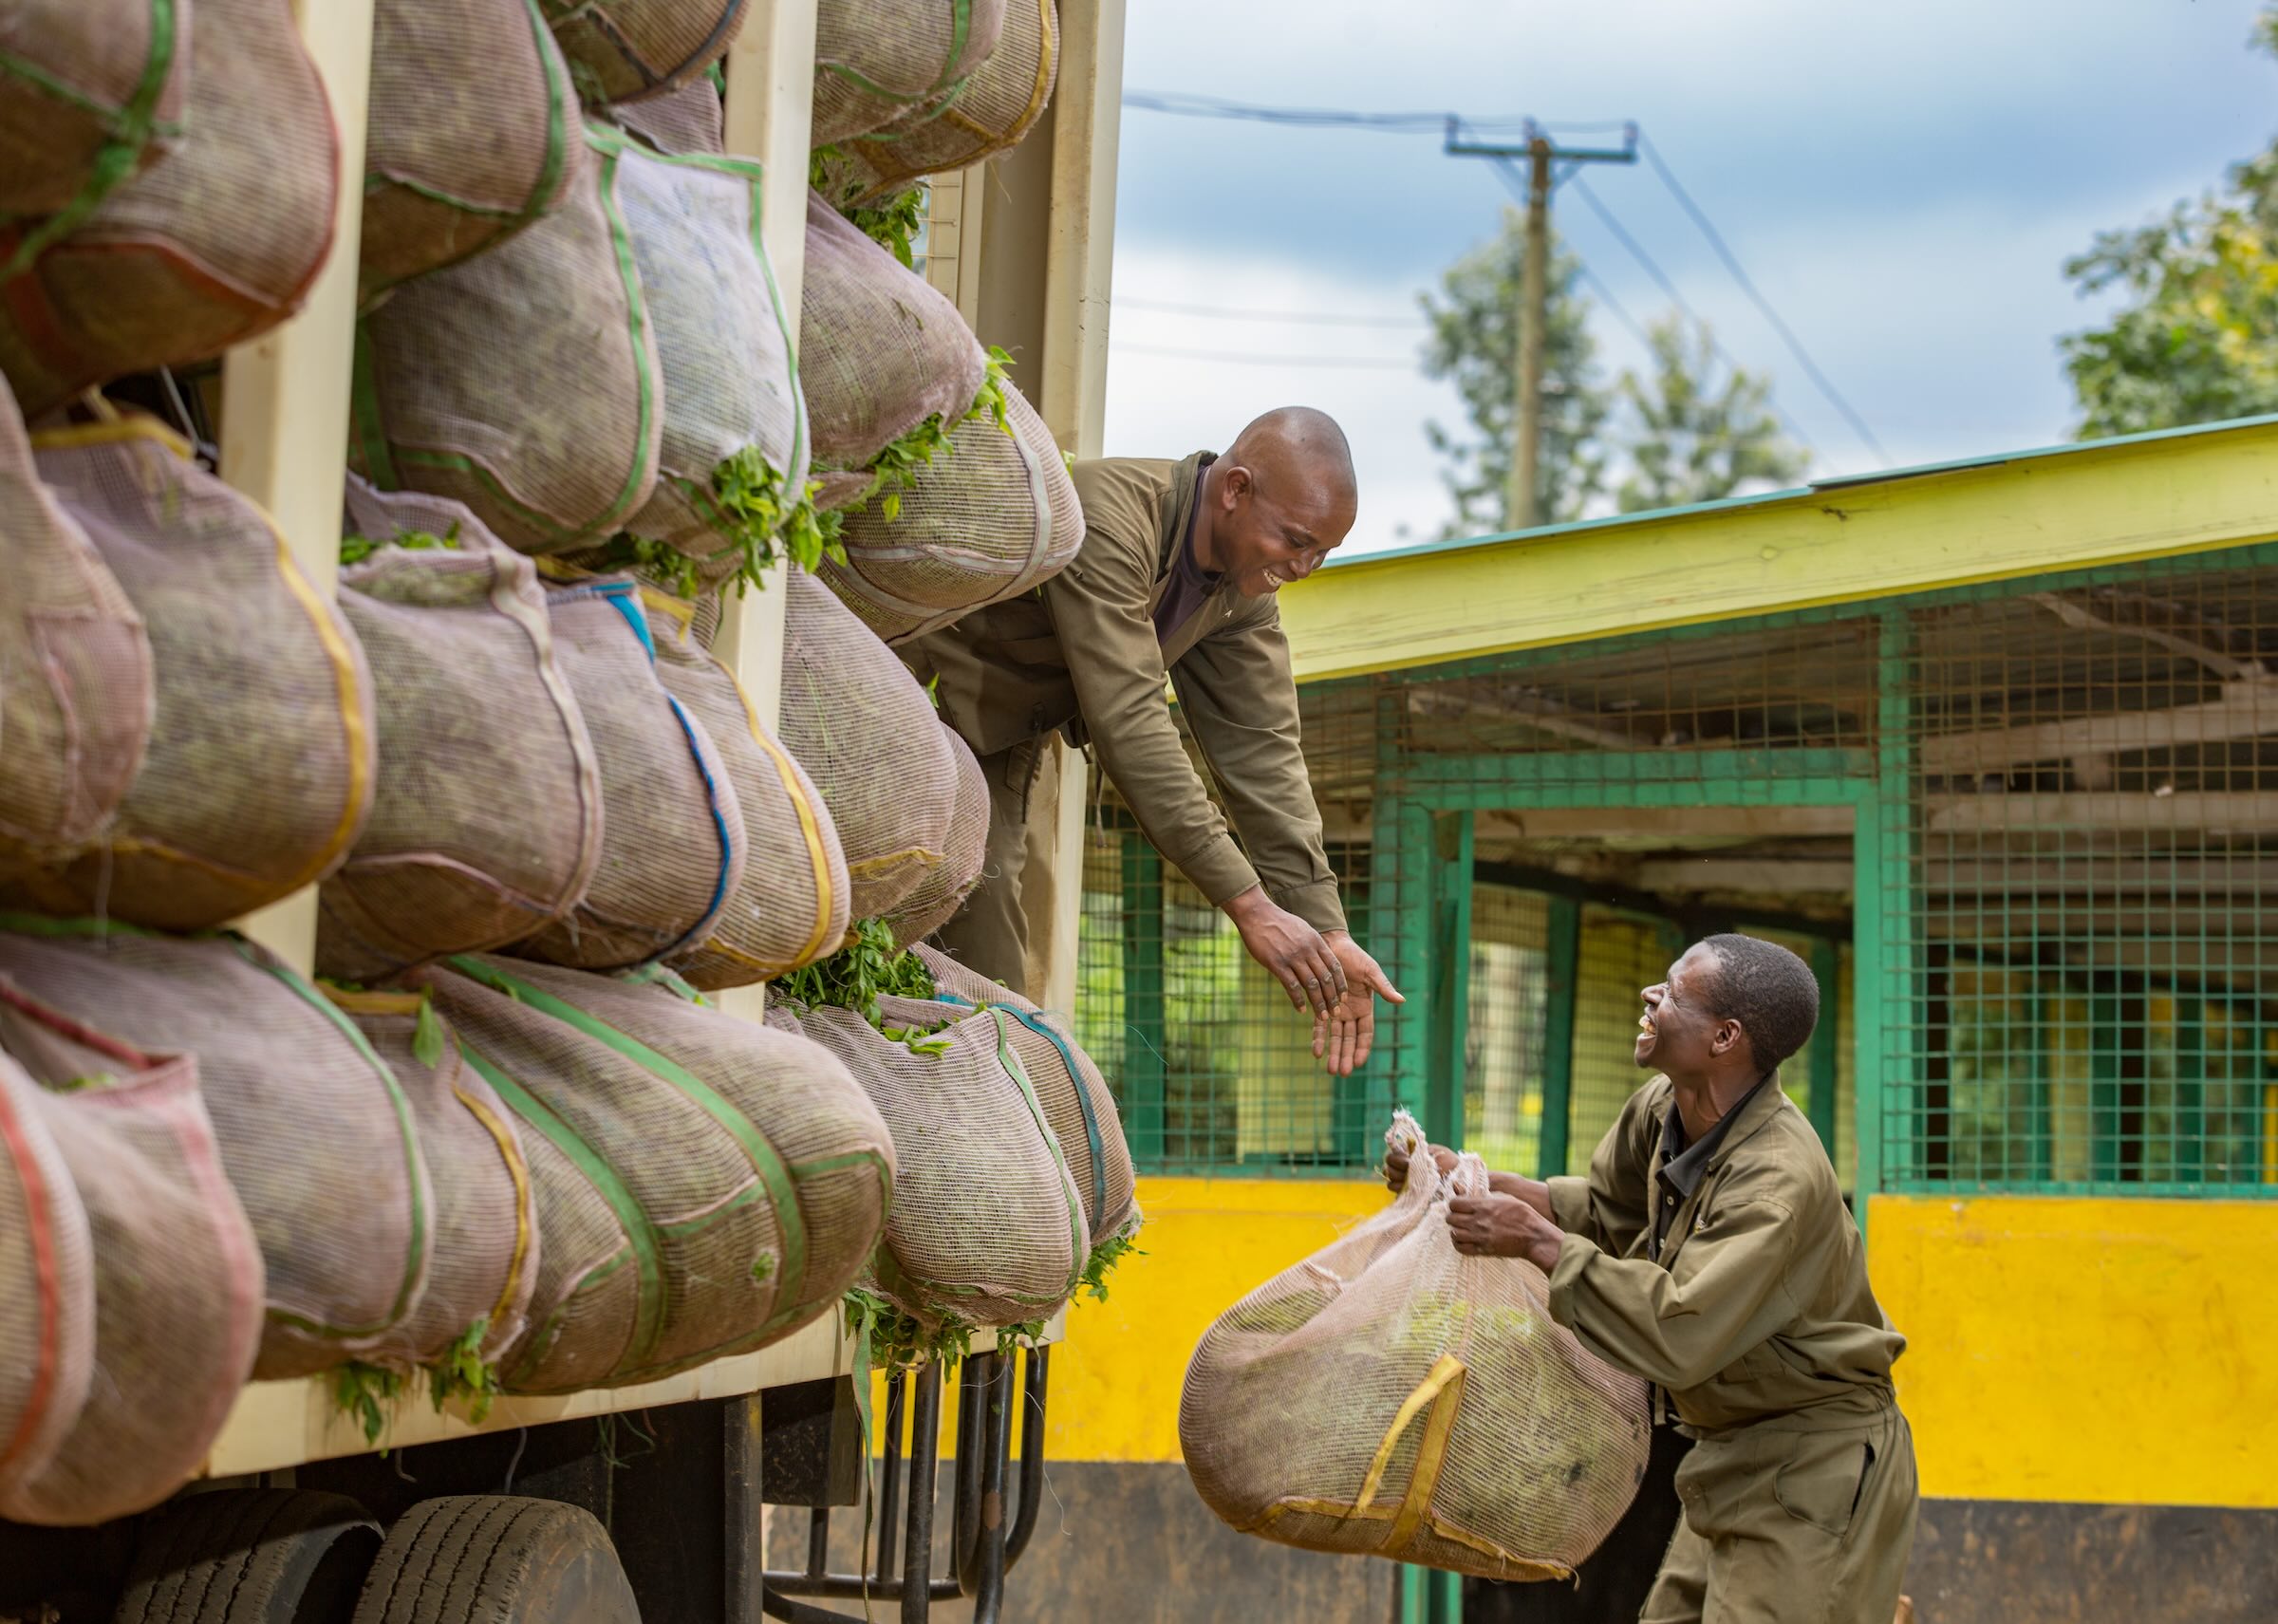 Tea loaders assist in weighing and loading green-leaf at collection centres to transport them back to the factory for processing. Samuel Wanjohi receives a sack of green-leaf from Isaac Muiithi. Kimunye Tea Collection Centre, Kirinyaga County, Kenya.